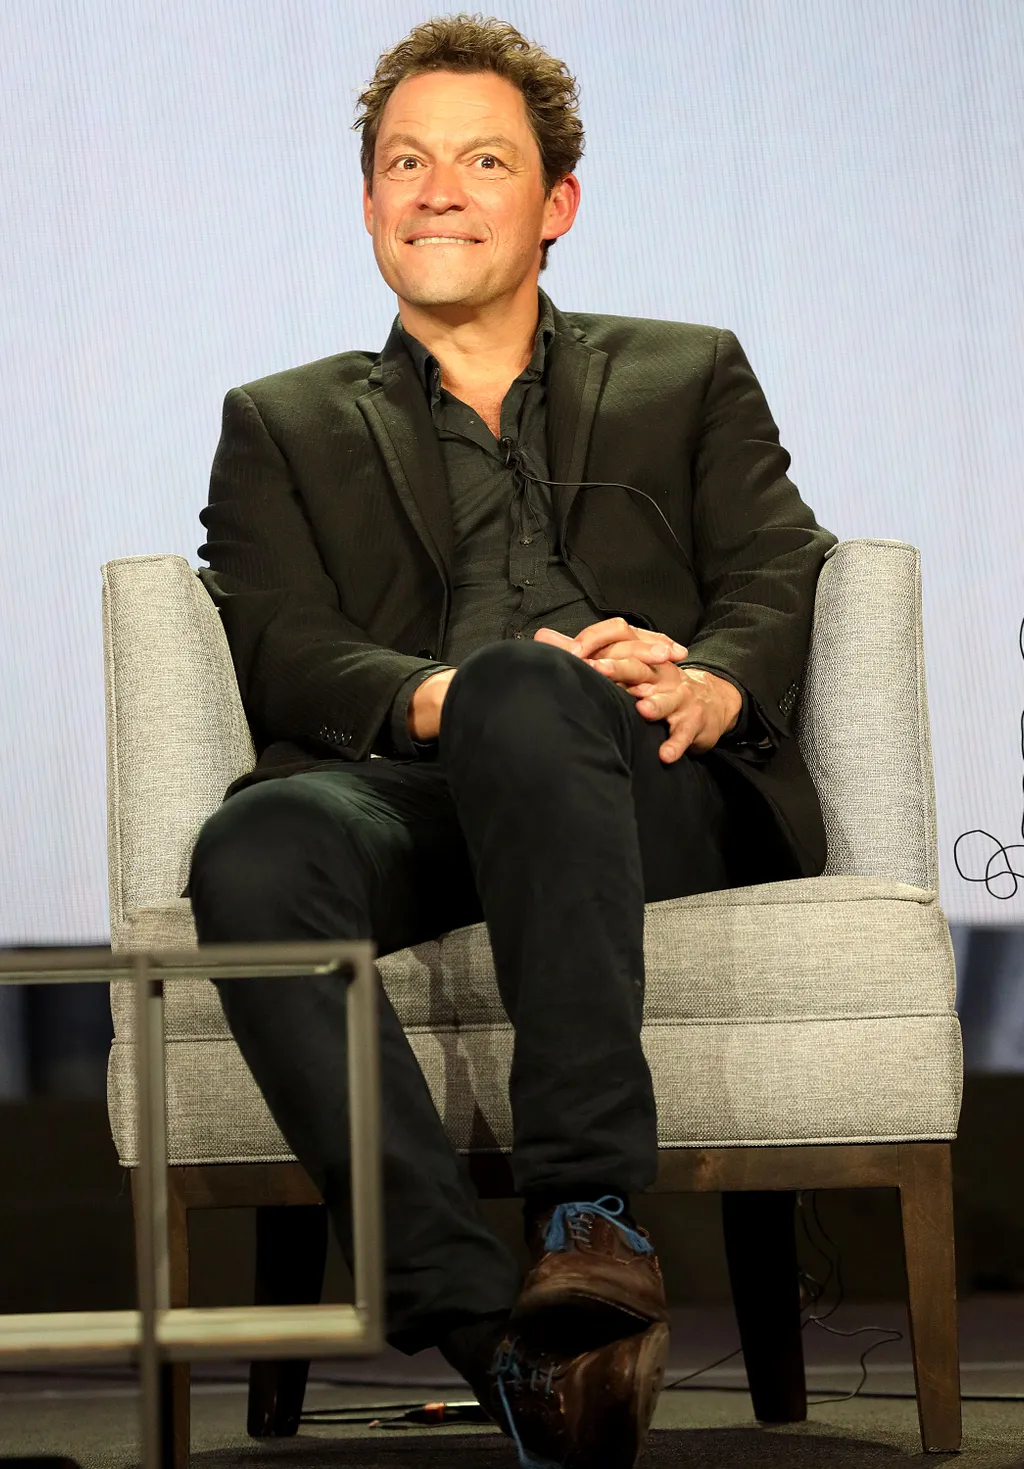 2019 Winter TCA Tour - Day 4 GettyImageRank3 